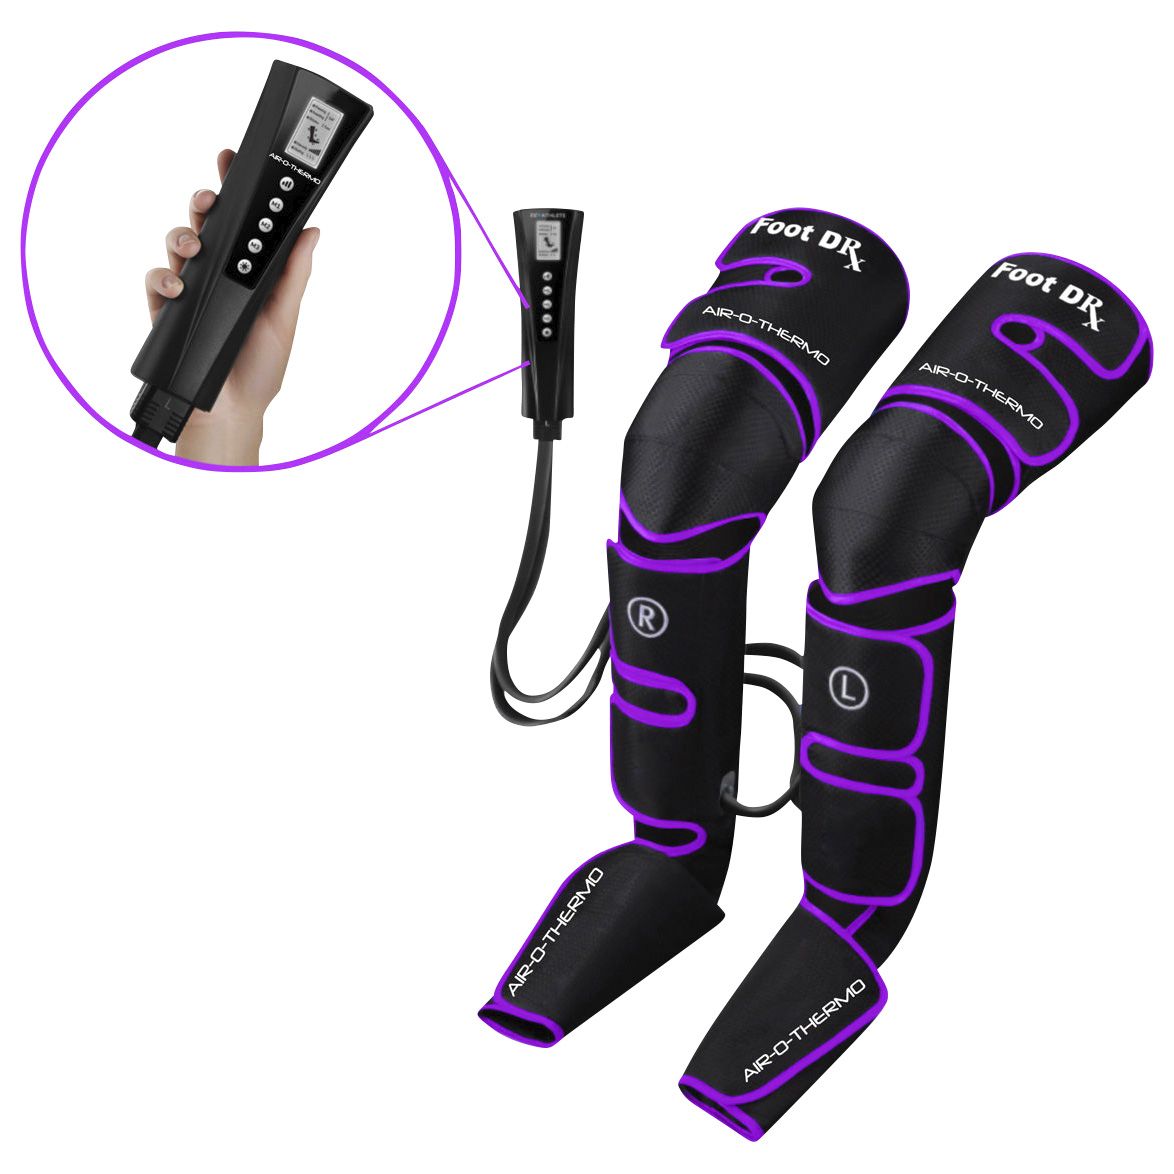 Evertone Air-O-Thermo Full-Leg Massager